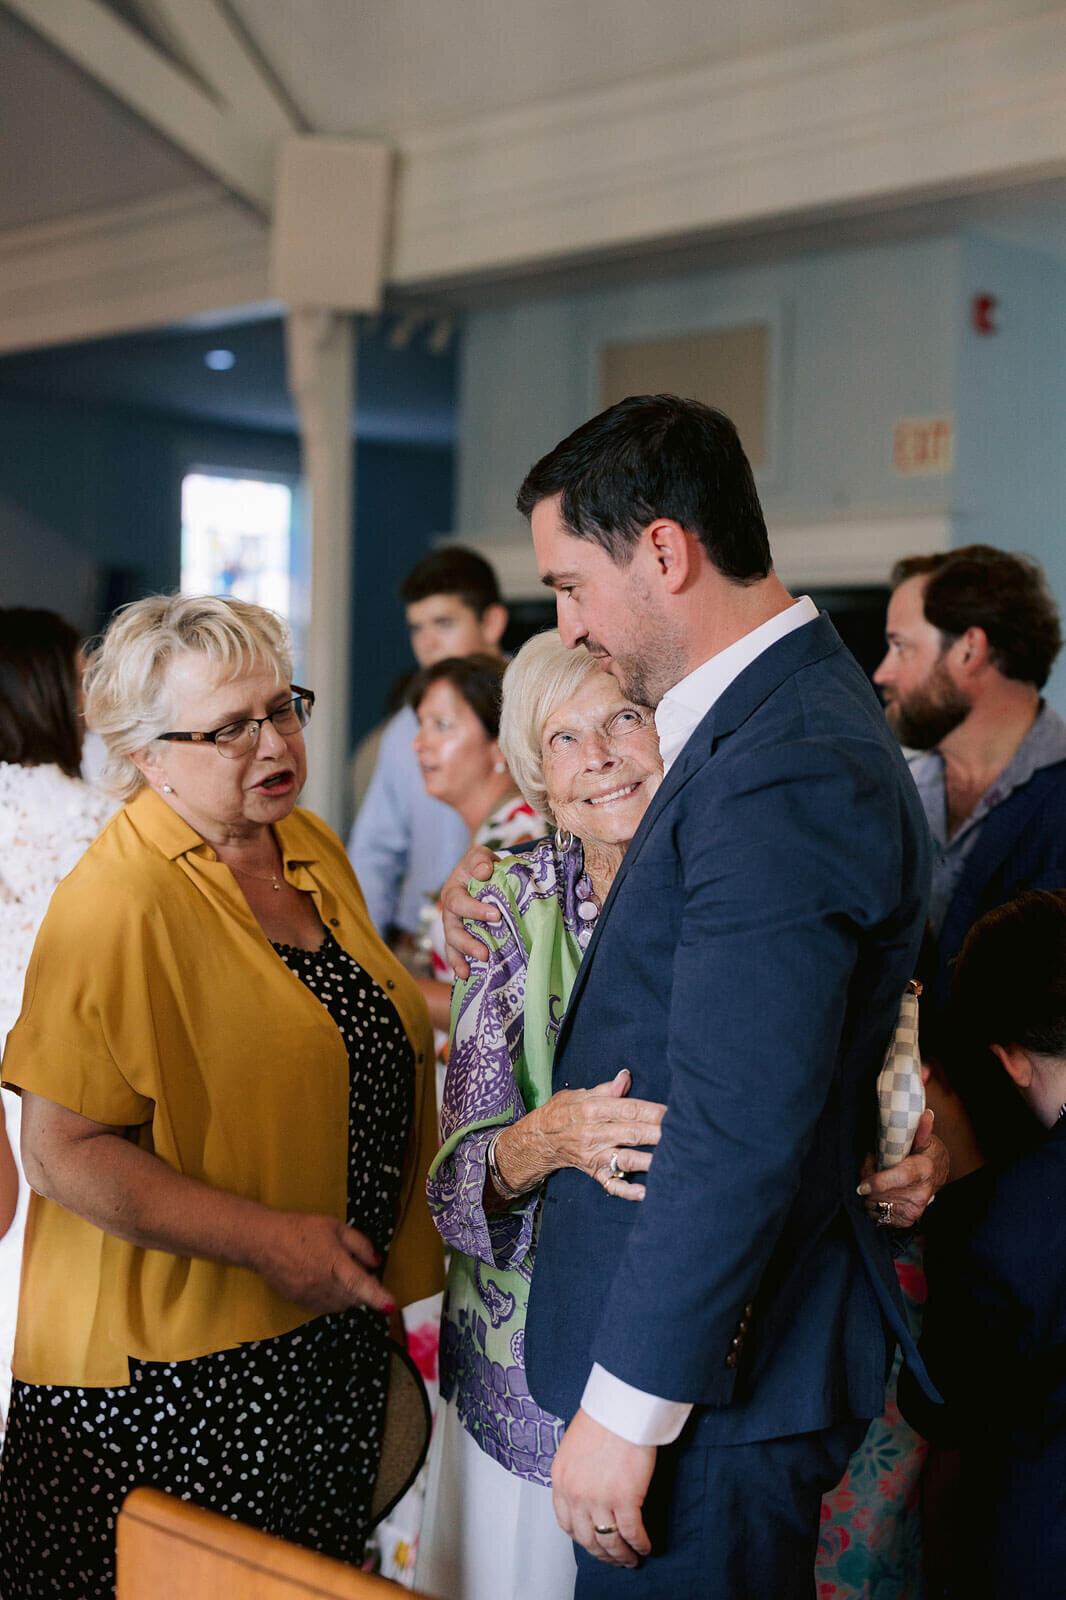 The groom is being hugged by an old woman while he speaks to another old woman at Cape Cod Summer Tent.